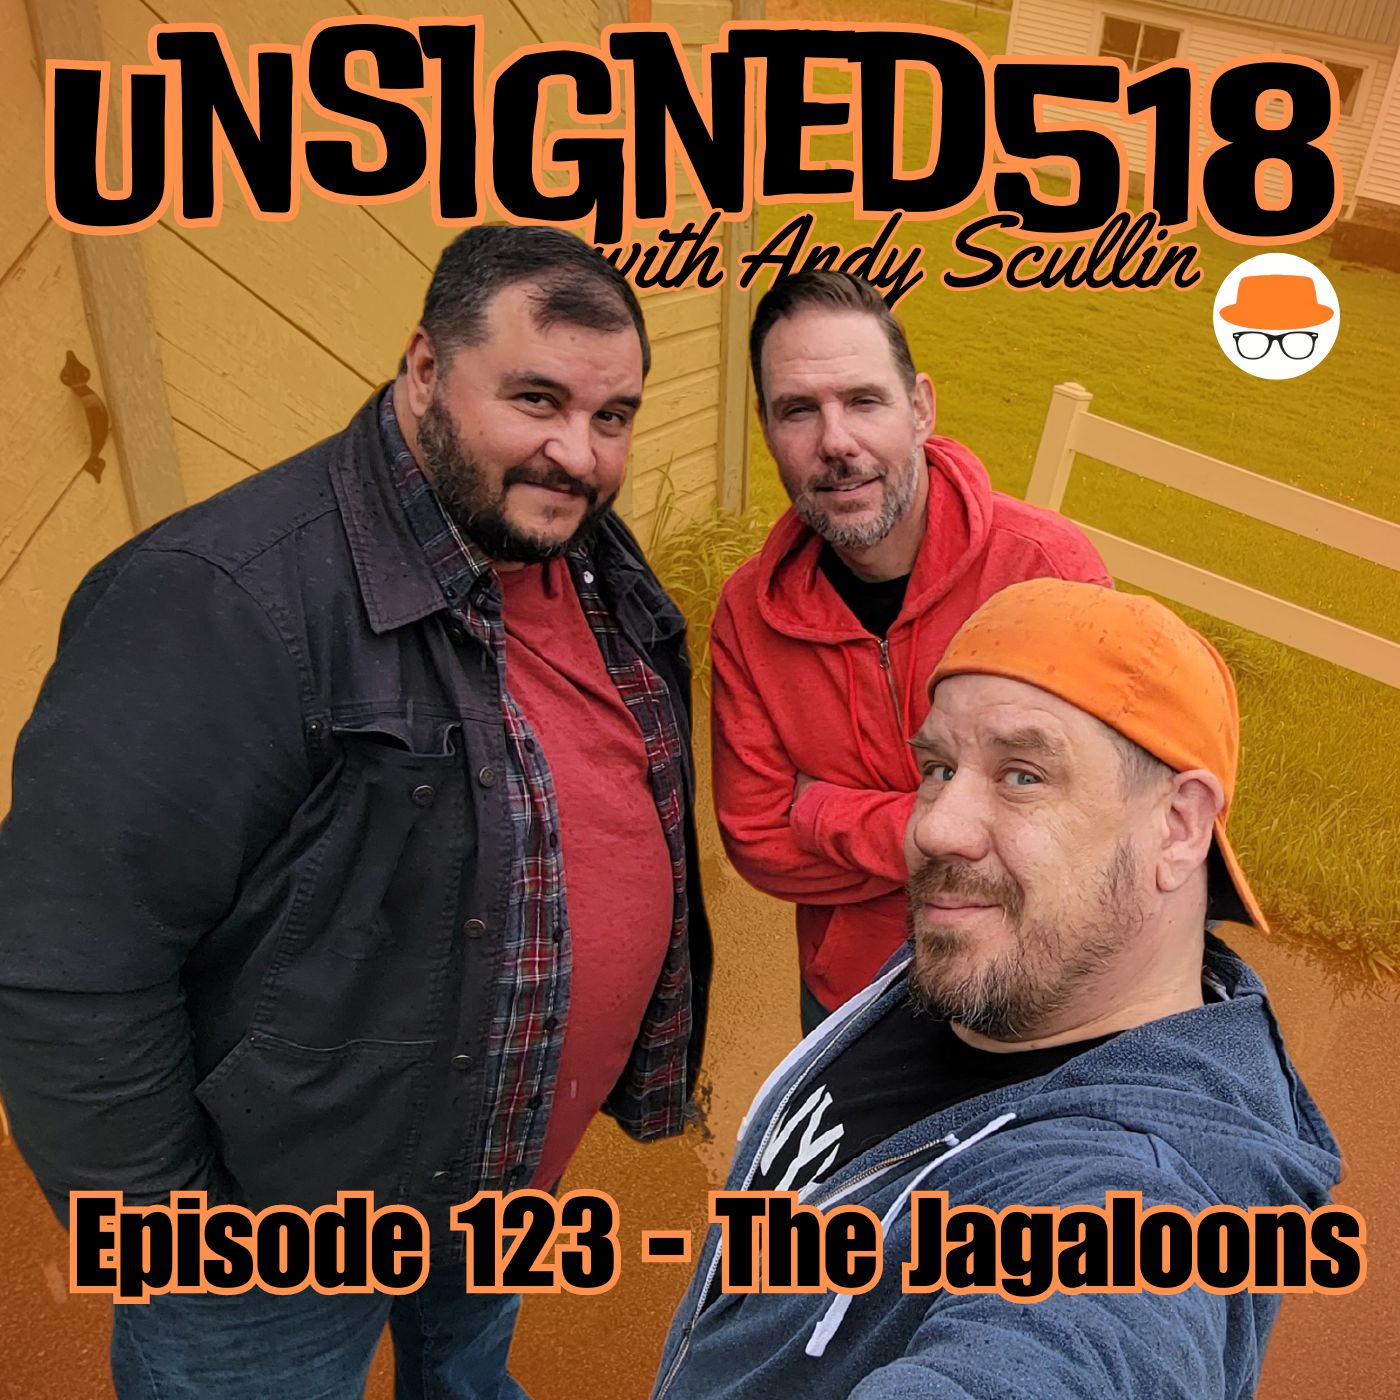 Unsigned518 - Episode 123 - The Jagaloons